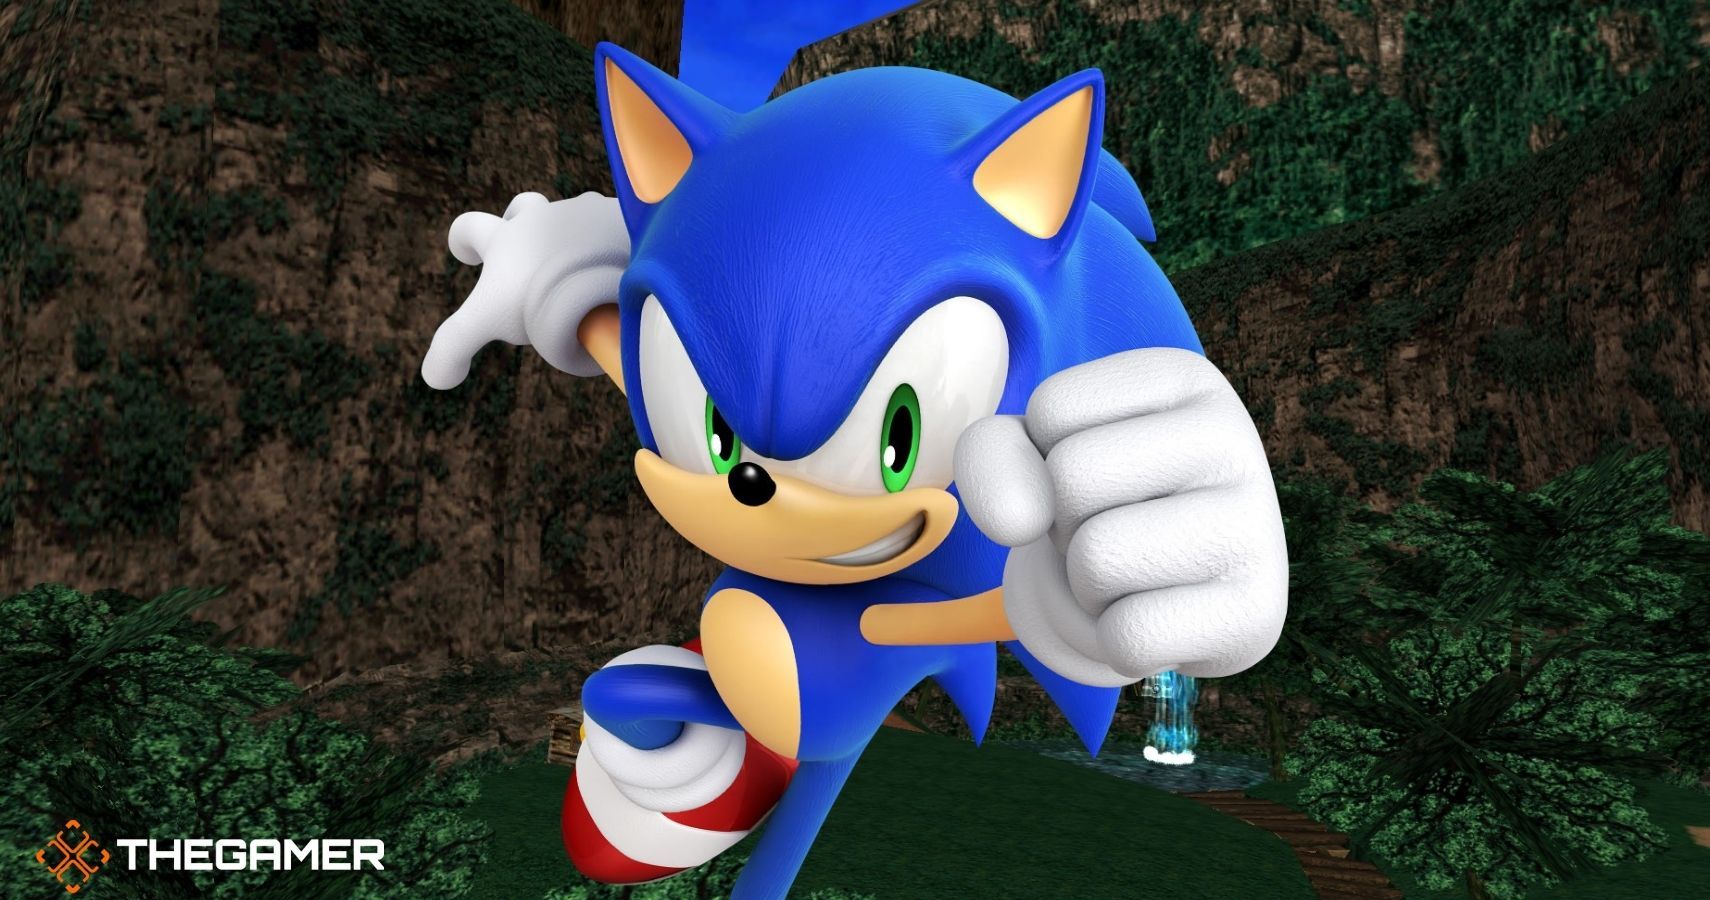 HOW OLD IS SONIC THE HEDGEHOG? AGE THEORY